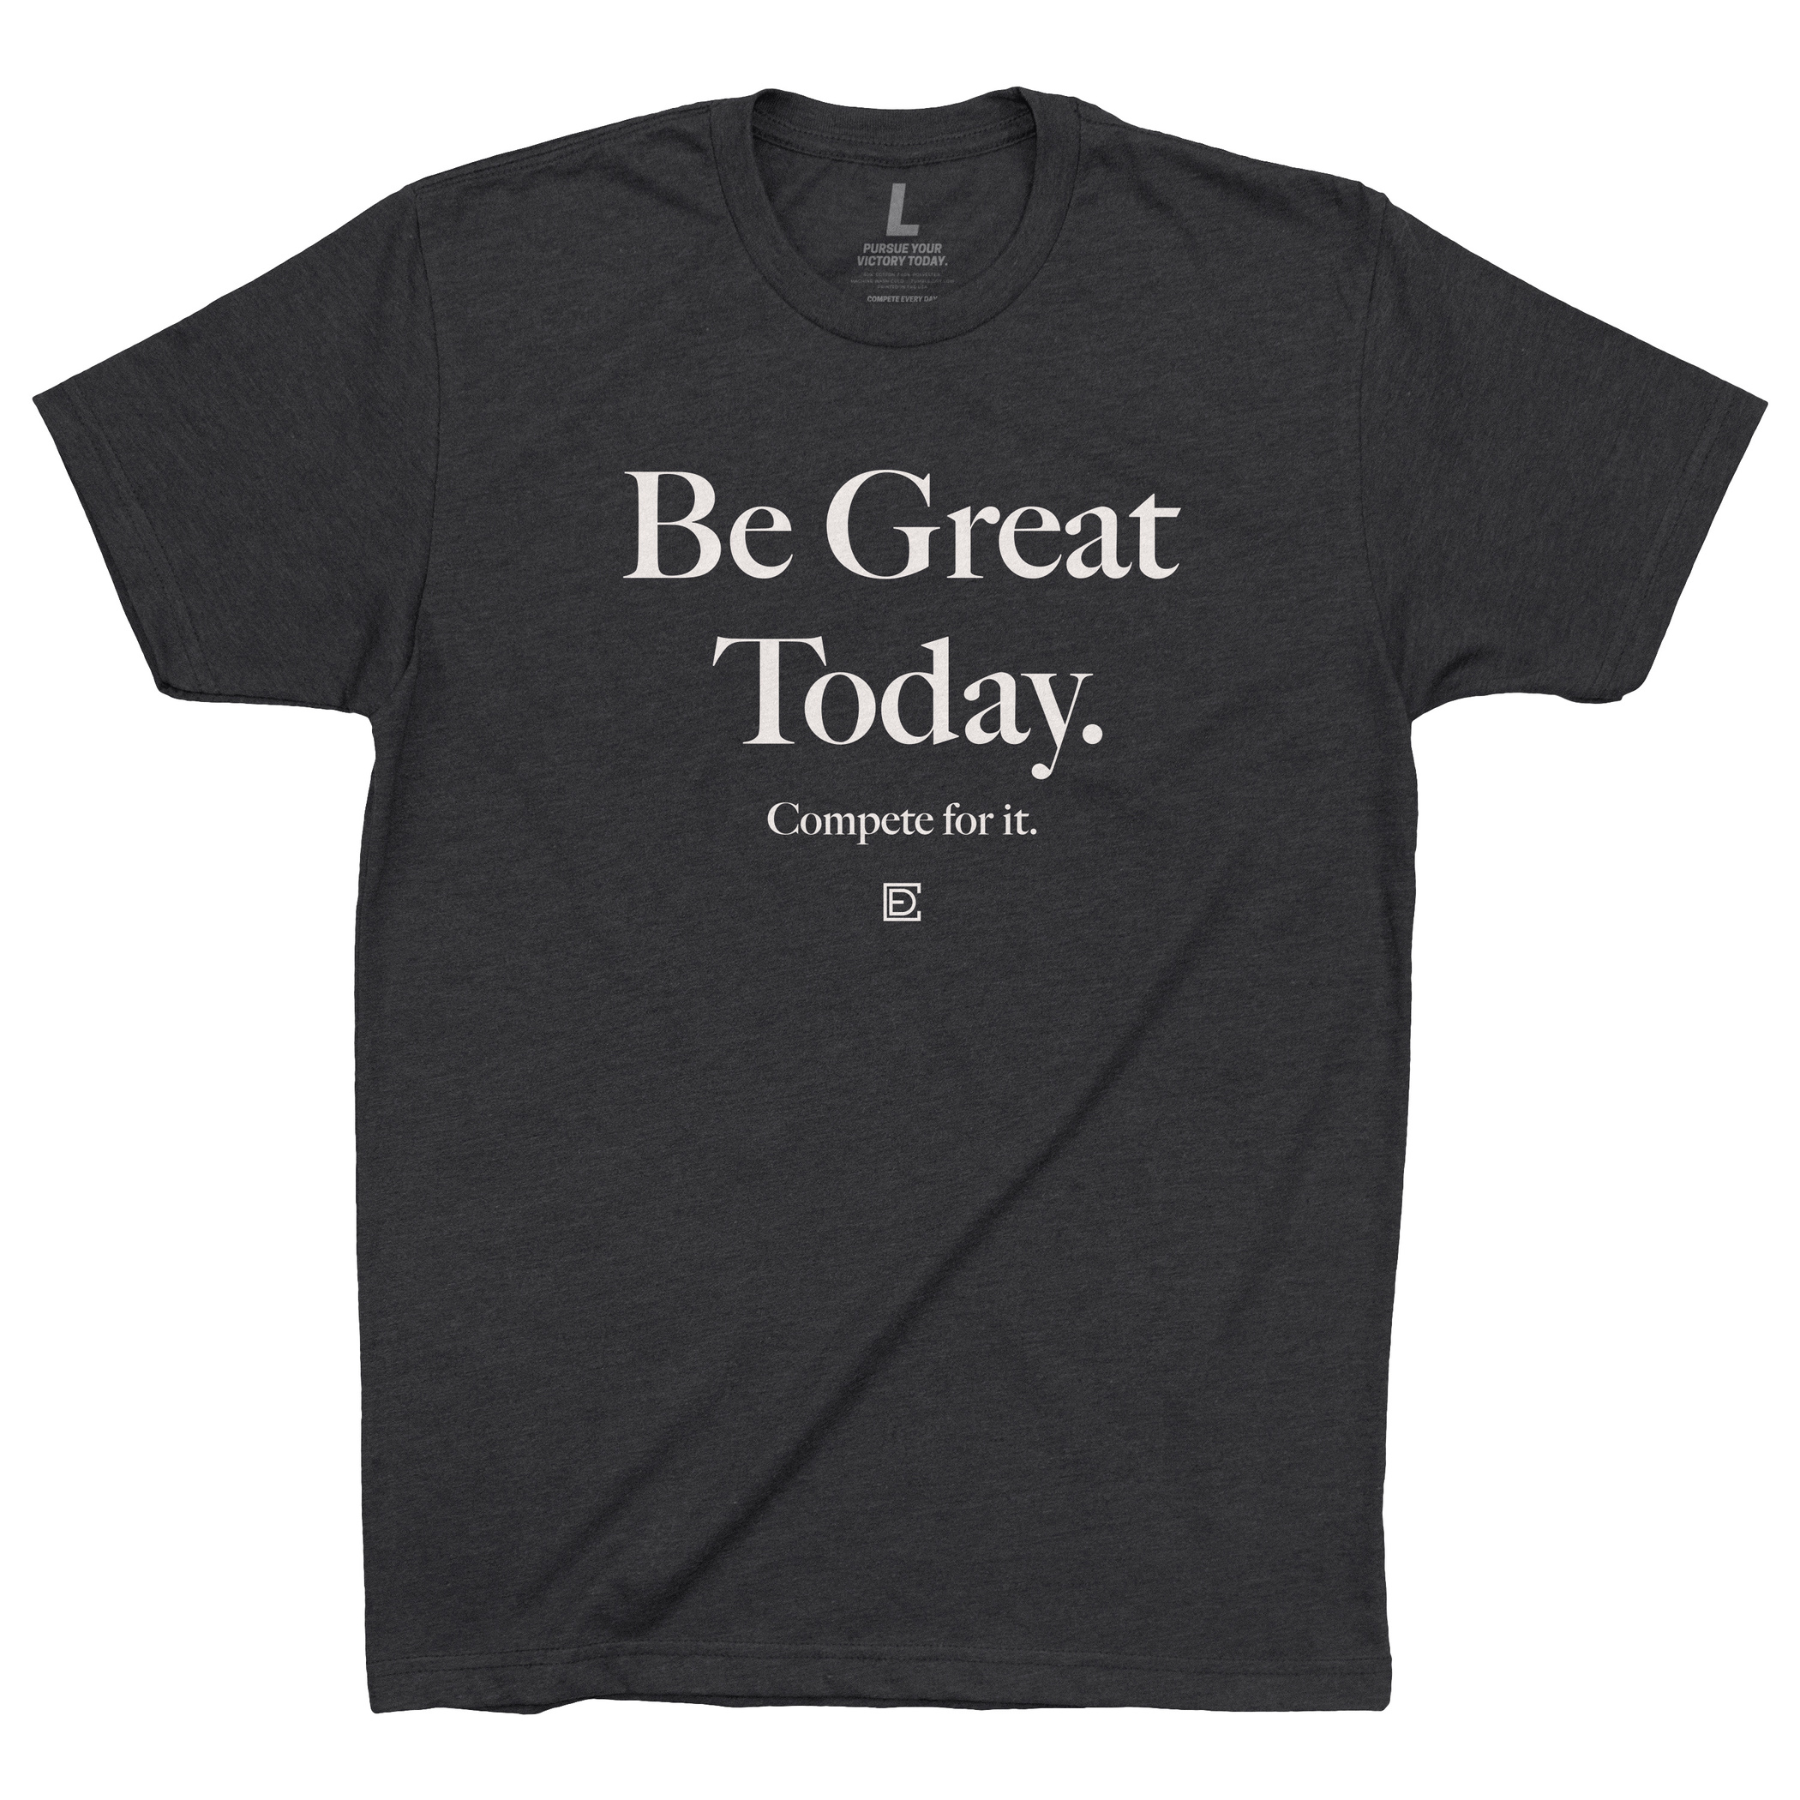 BE GREAT TODAY Men's Shirt